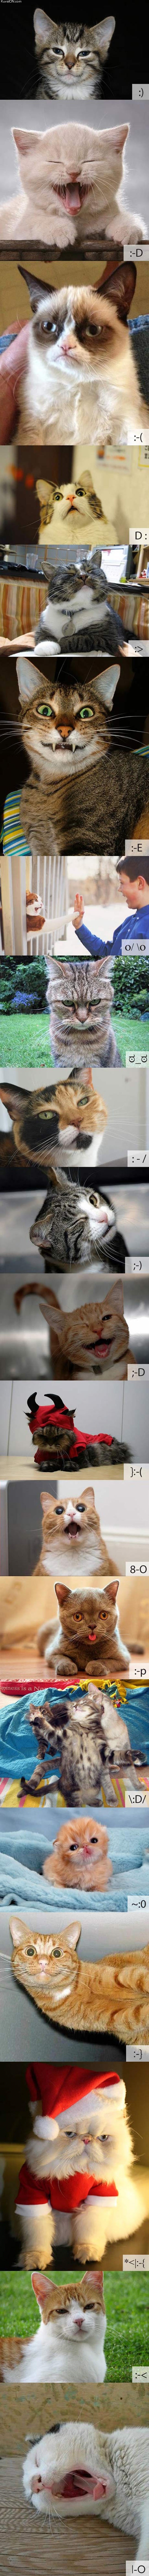 if_cats_were_emoticons.jpg